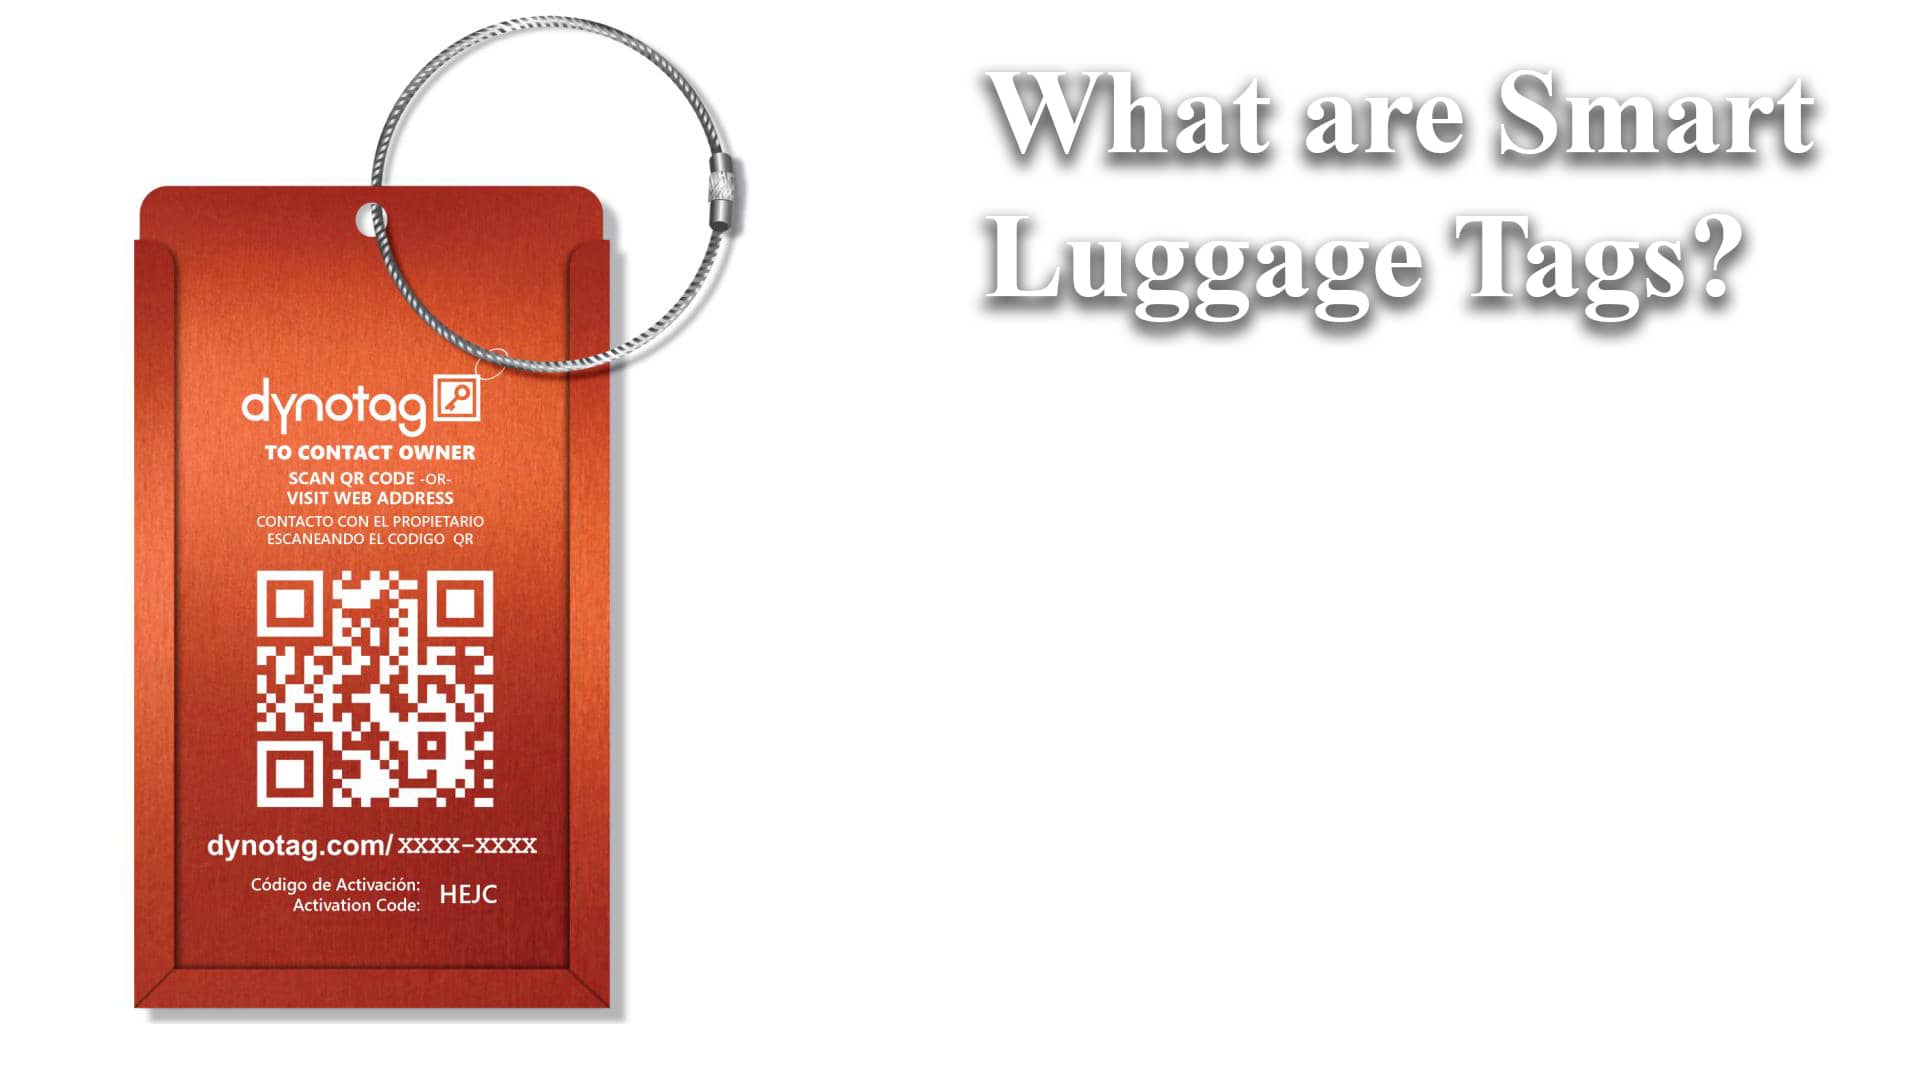 What are smart luggage tags